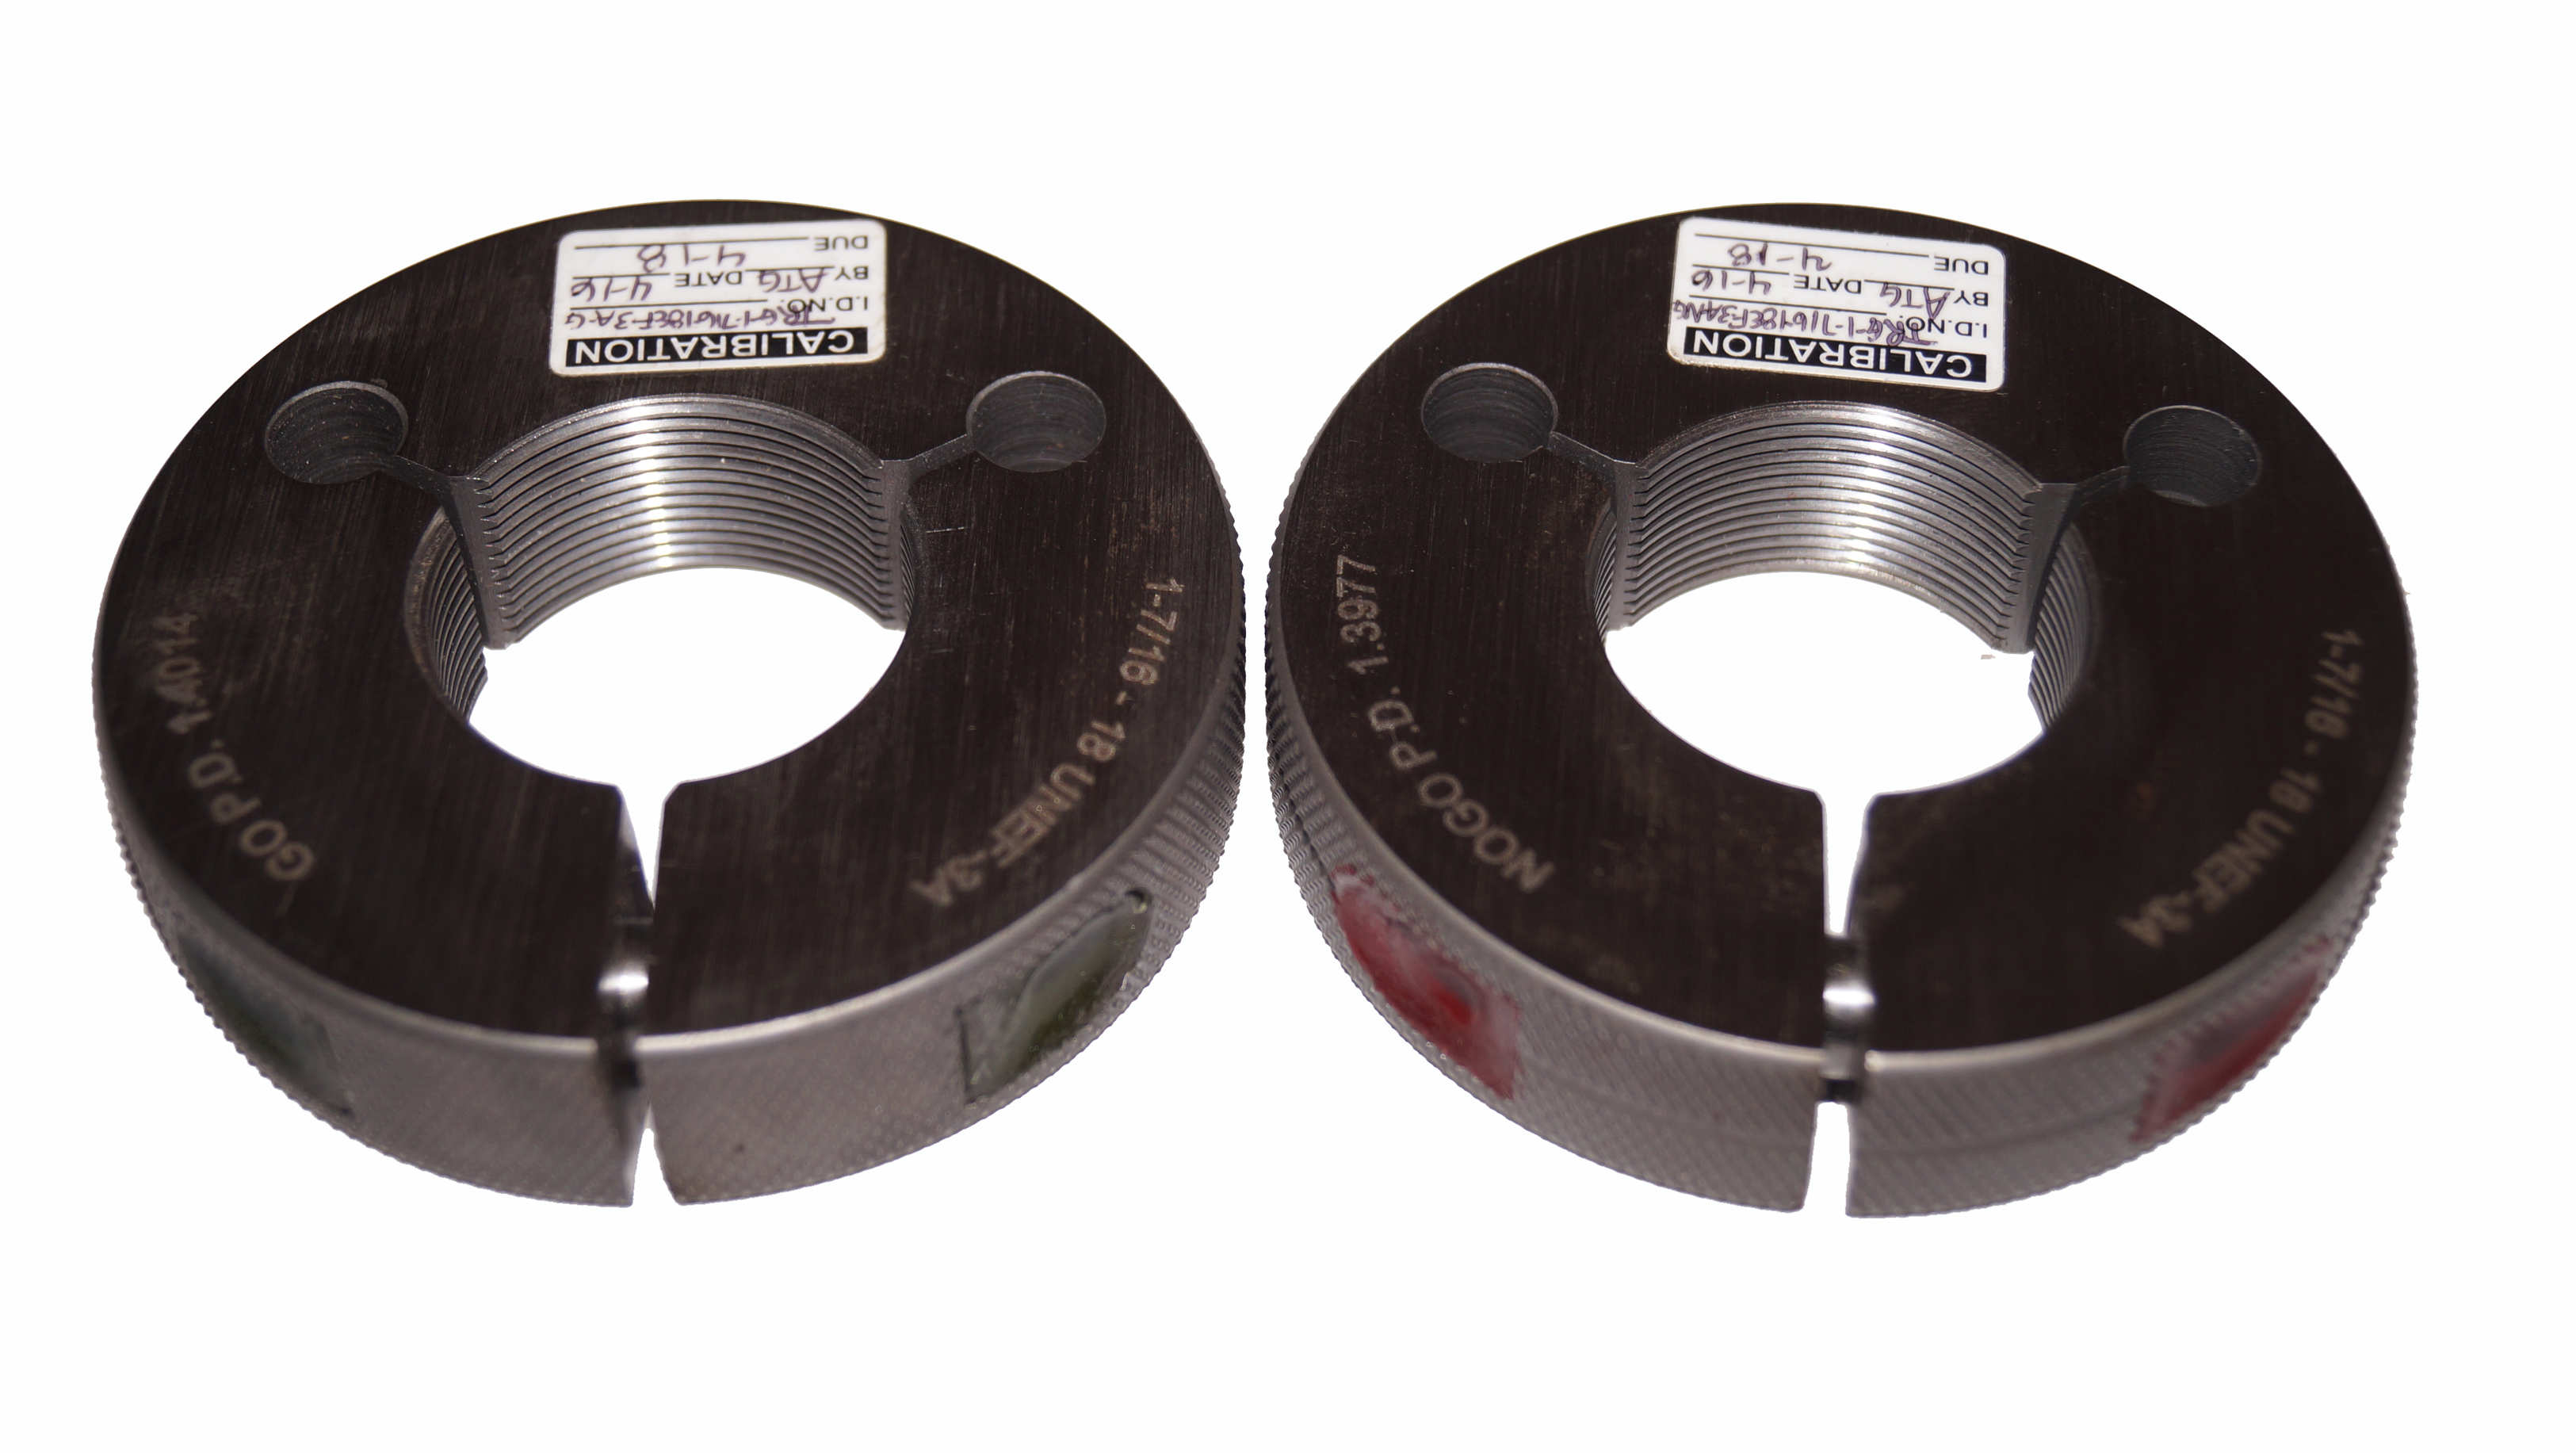 Details about   3/4 16 UNJF 3A THREAD RING GAGES .75 GO NO GO P.D.'S = .7094 & .7056 